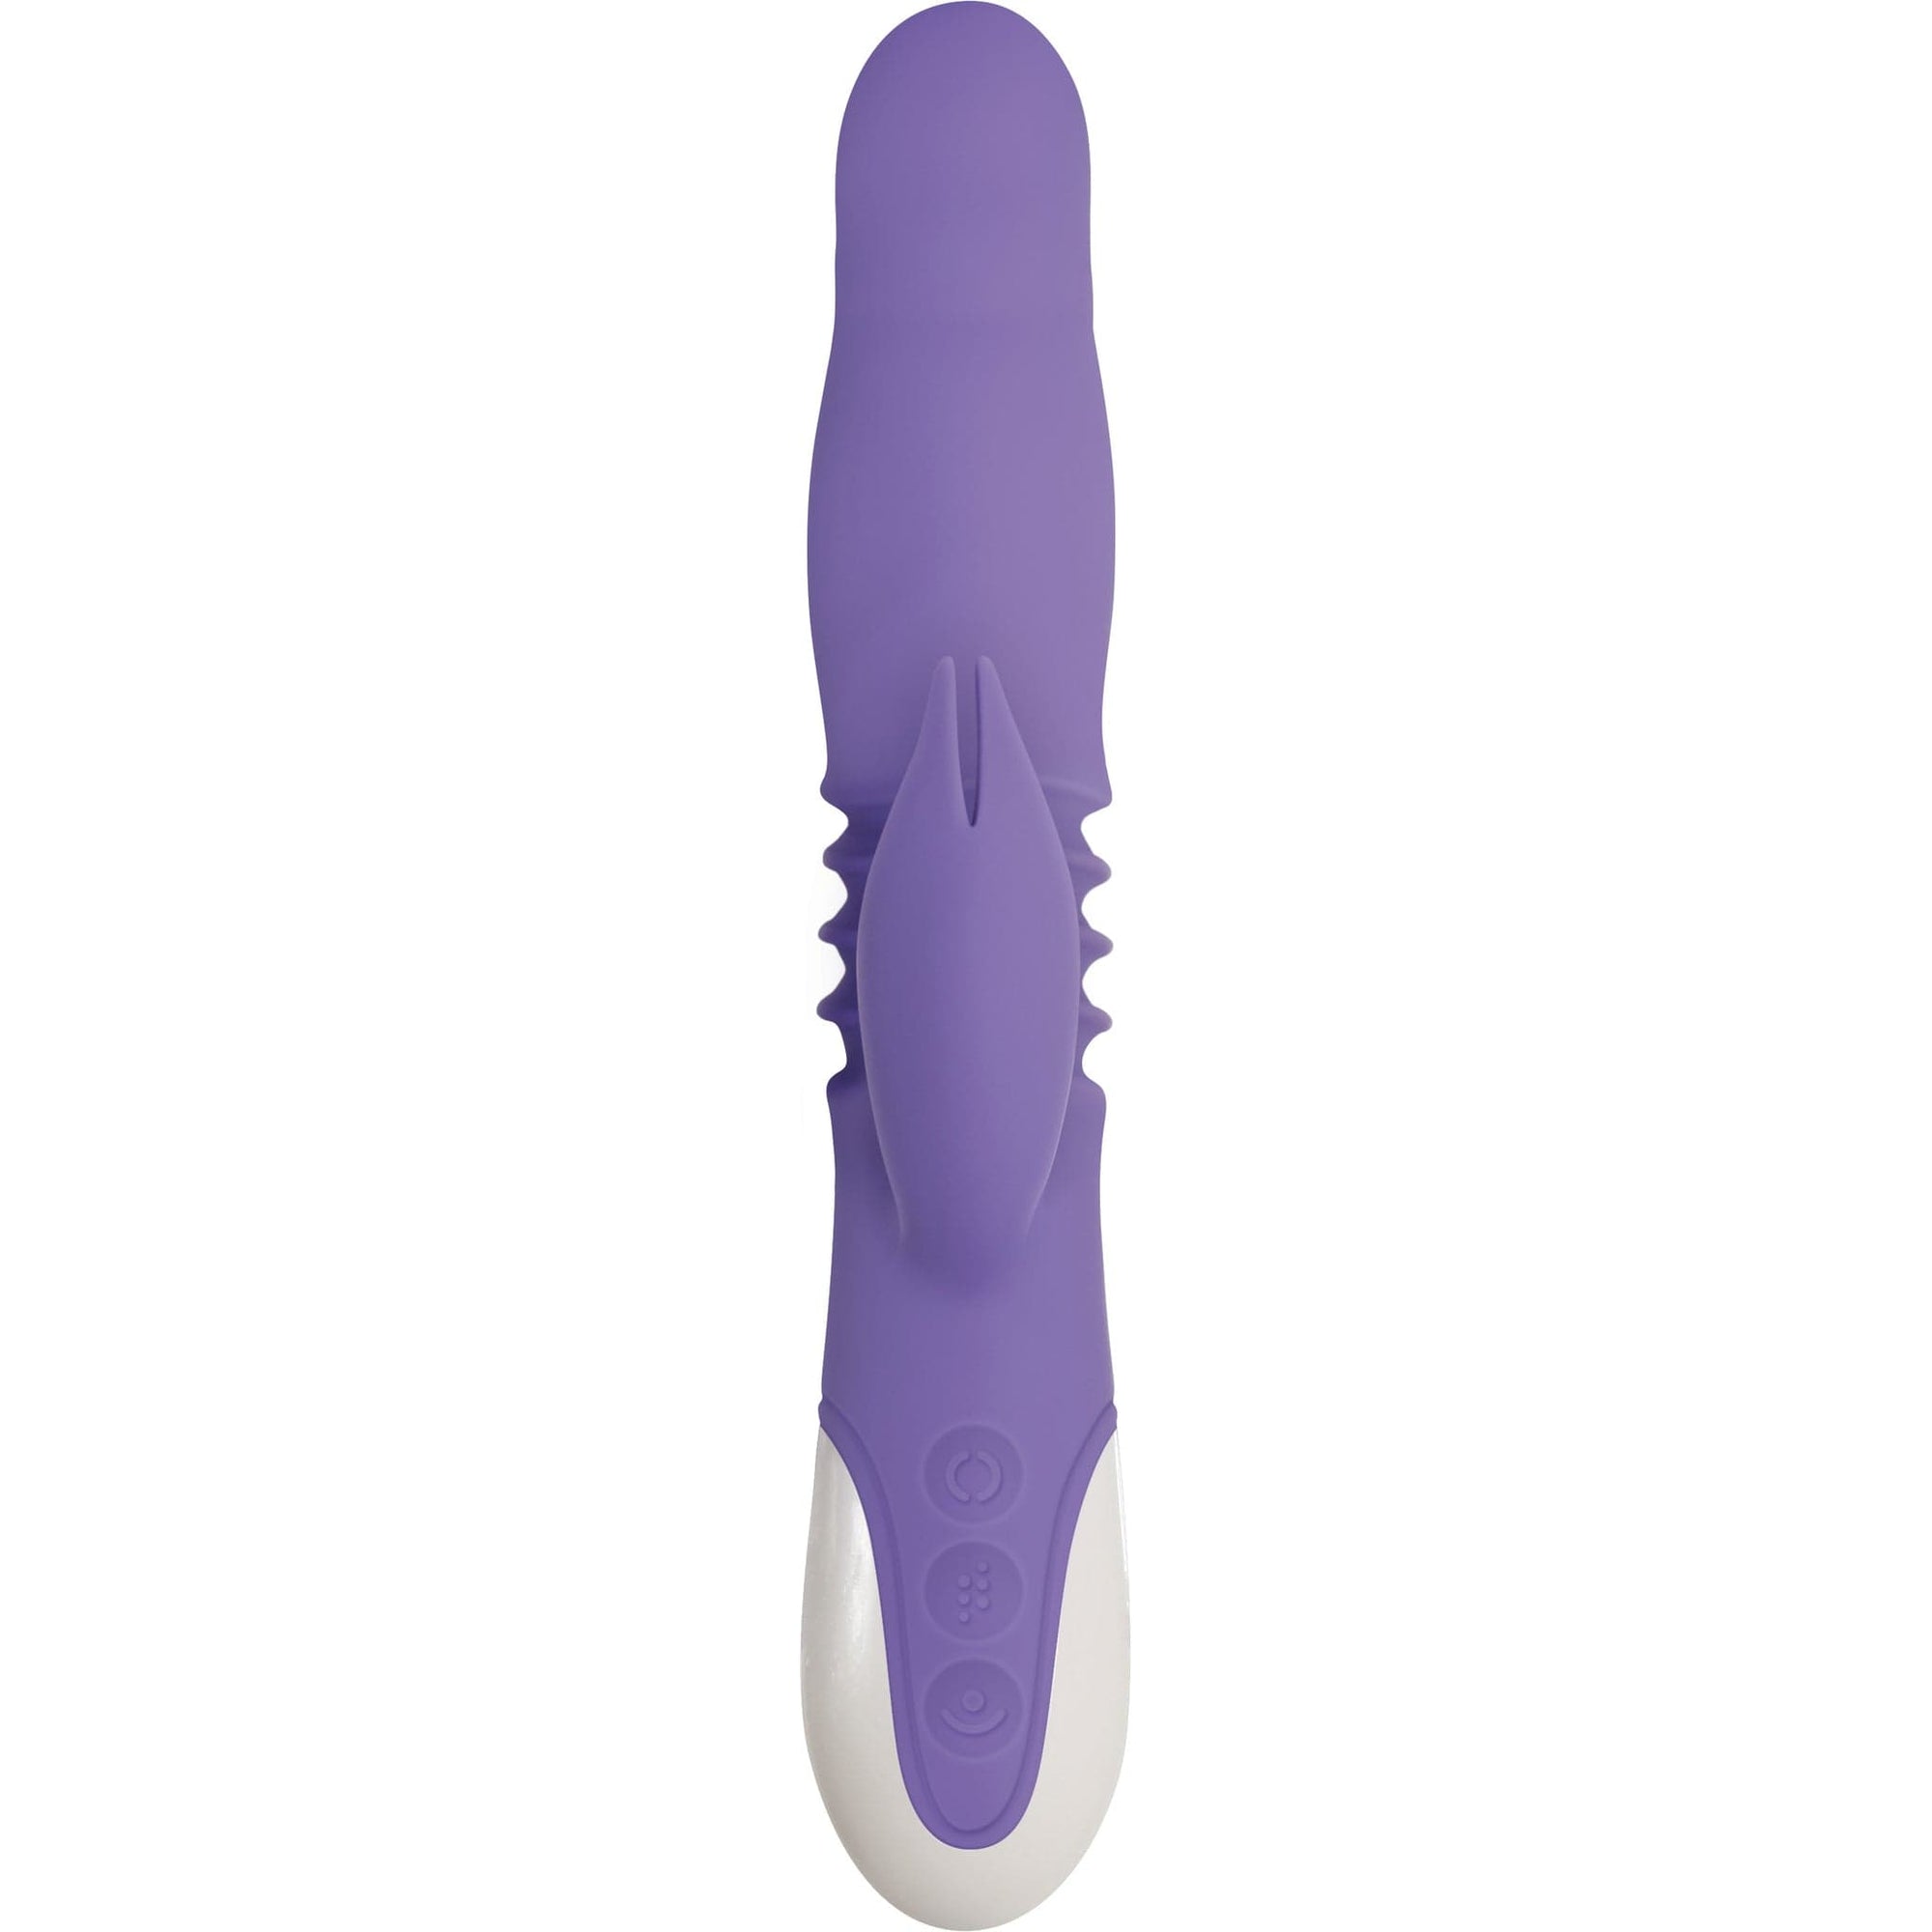 Evolved - Thick and Thrust Bunny Silicone Rechargeable Rabbit Vibrator (Purple) -  Rabbit Dildo (Vibration) Rechargeable  Durio.sg